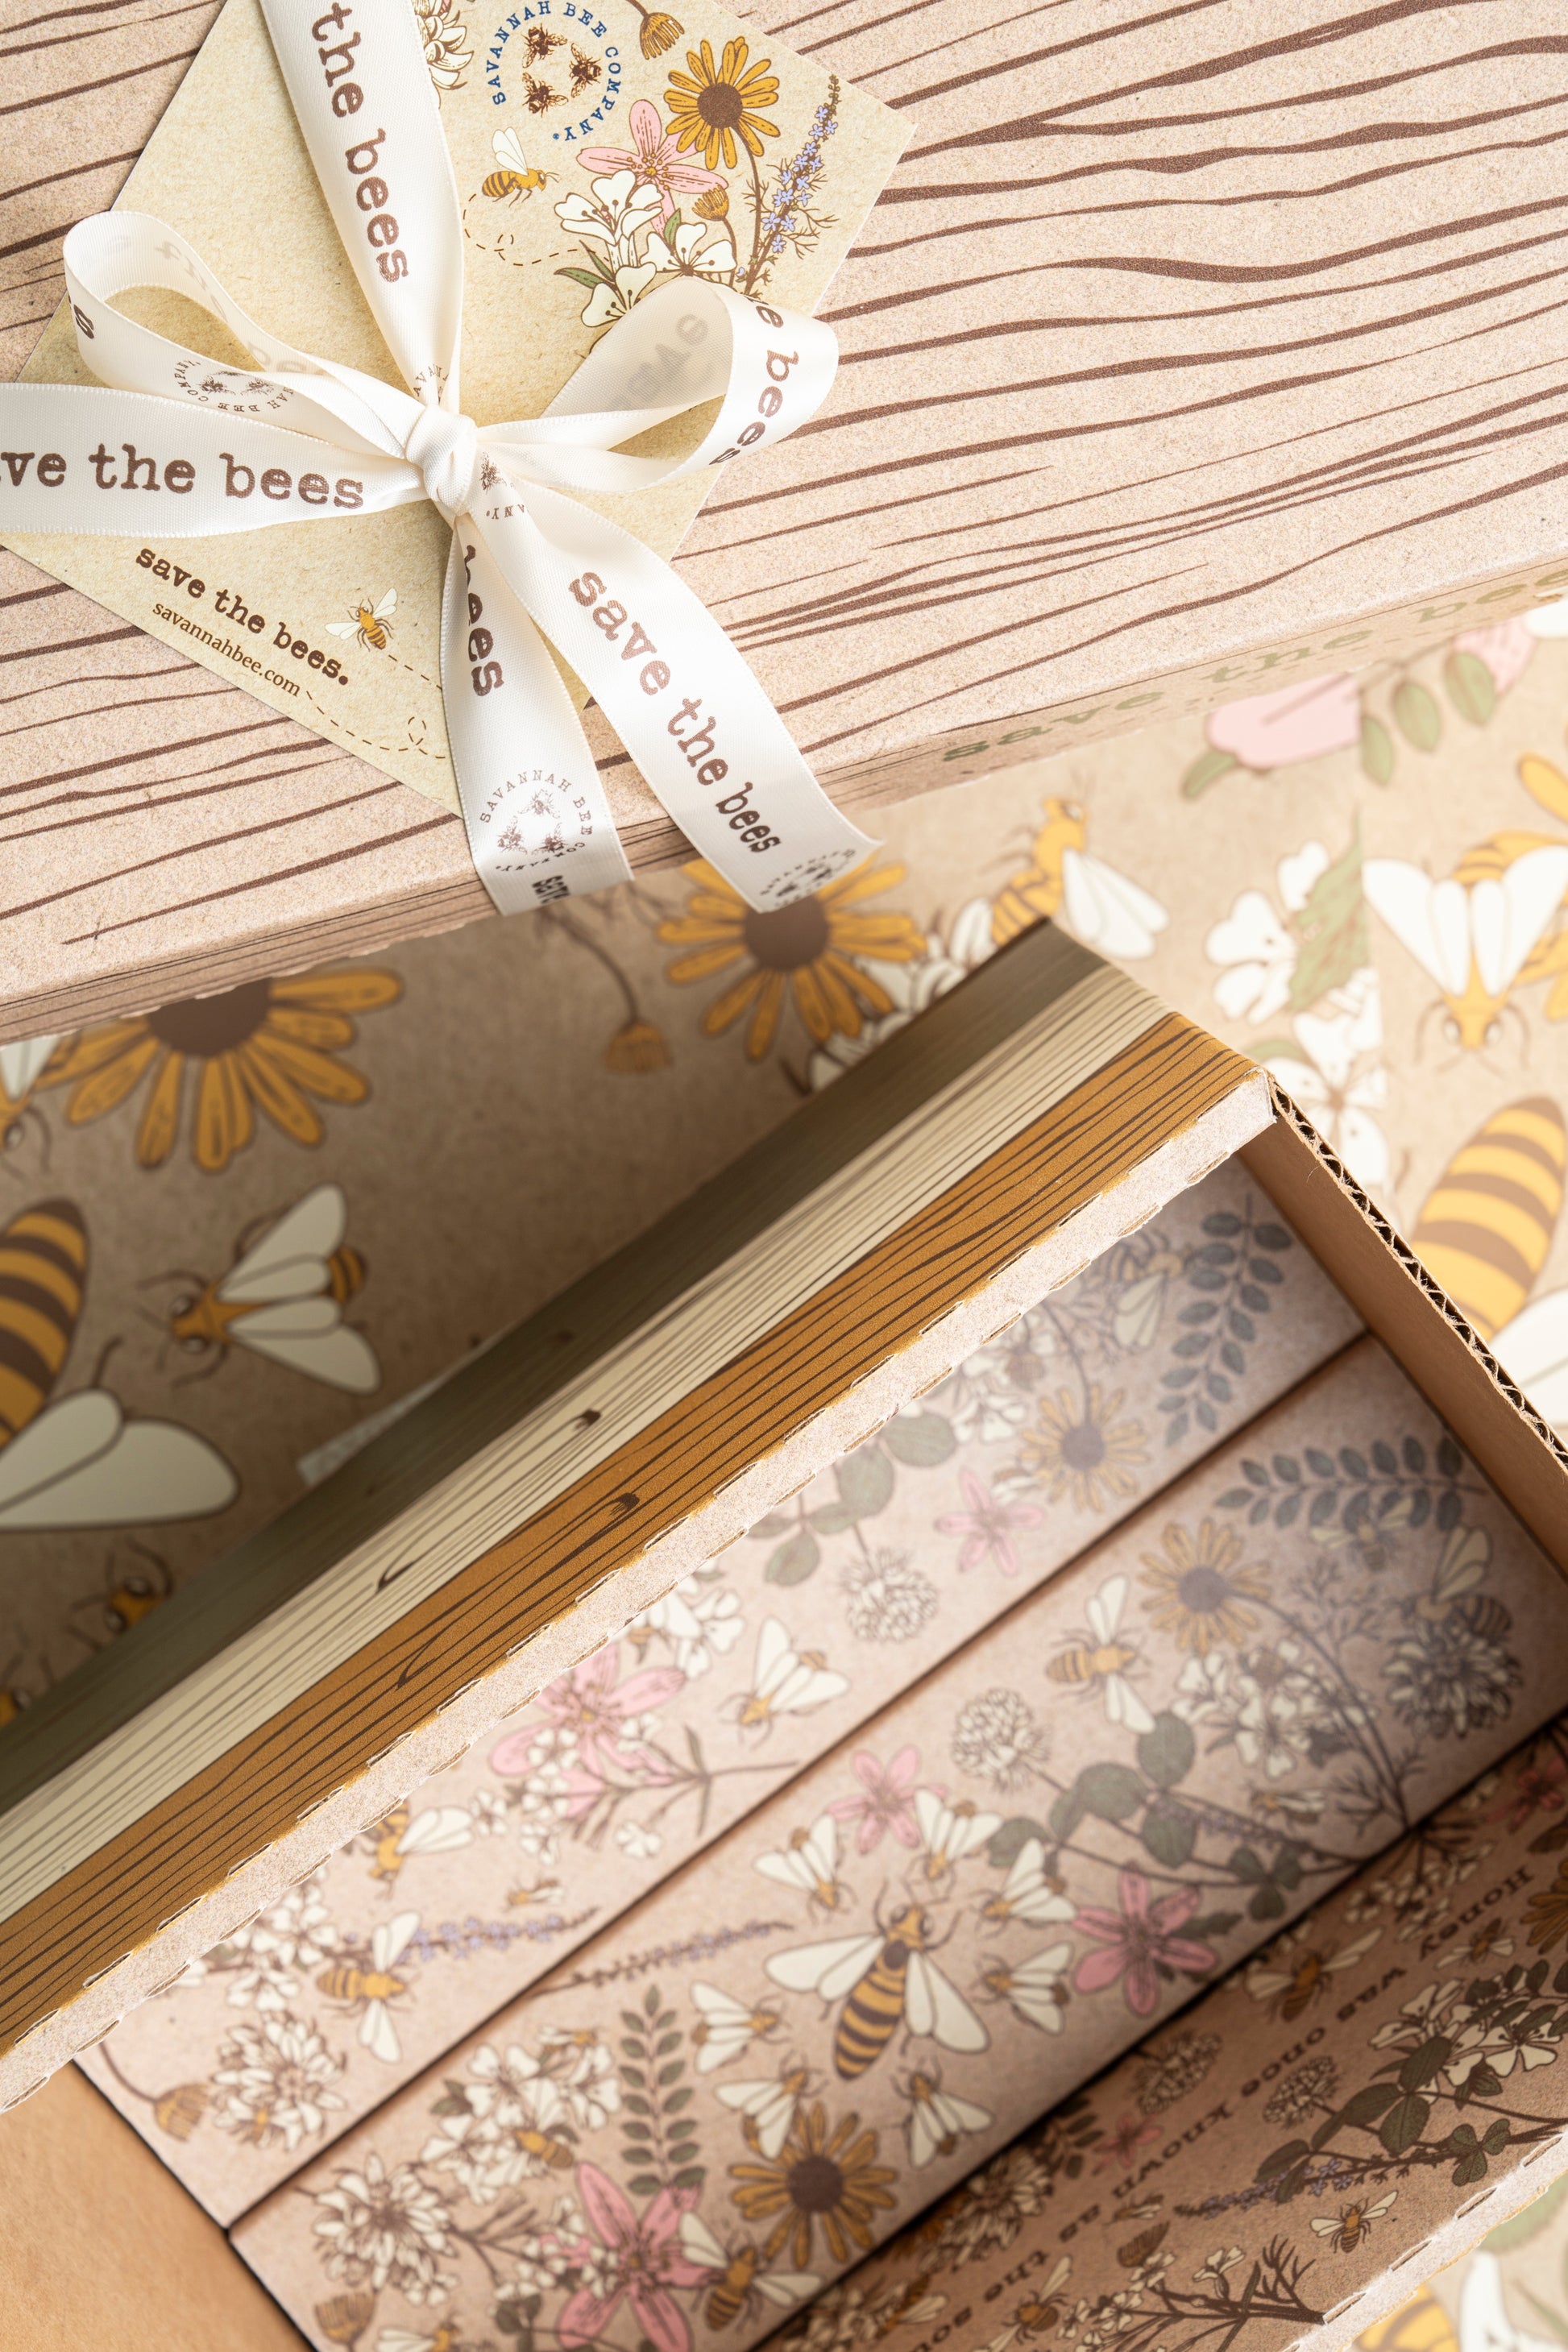 Open save the bees gift box on a floral background